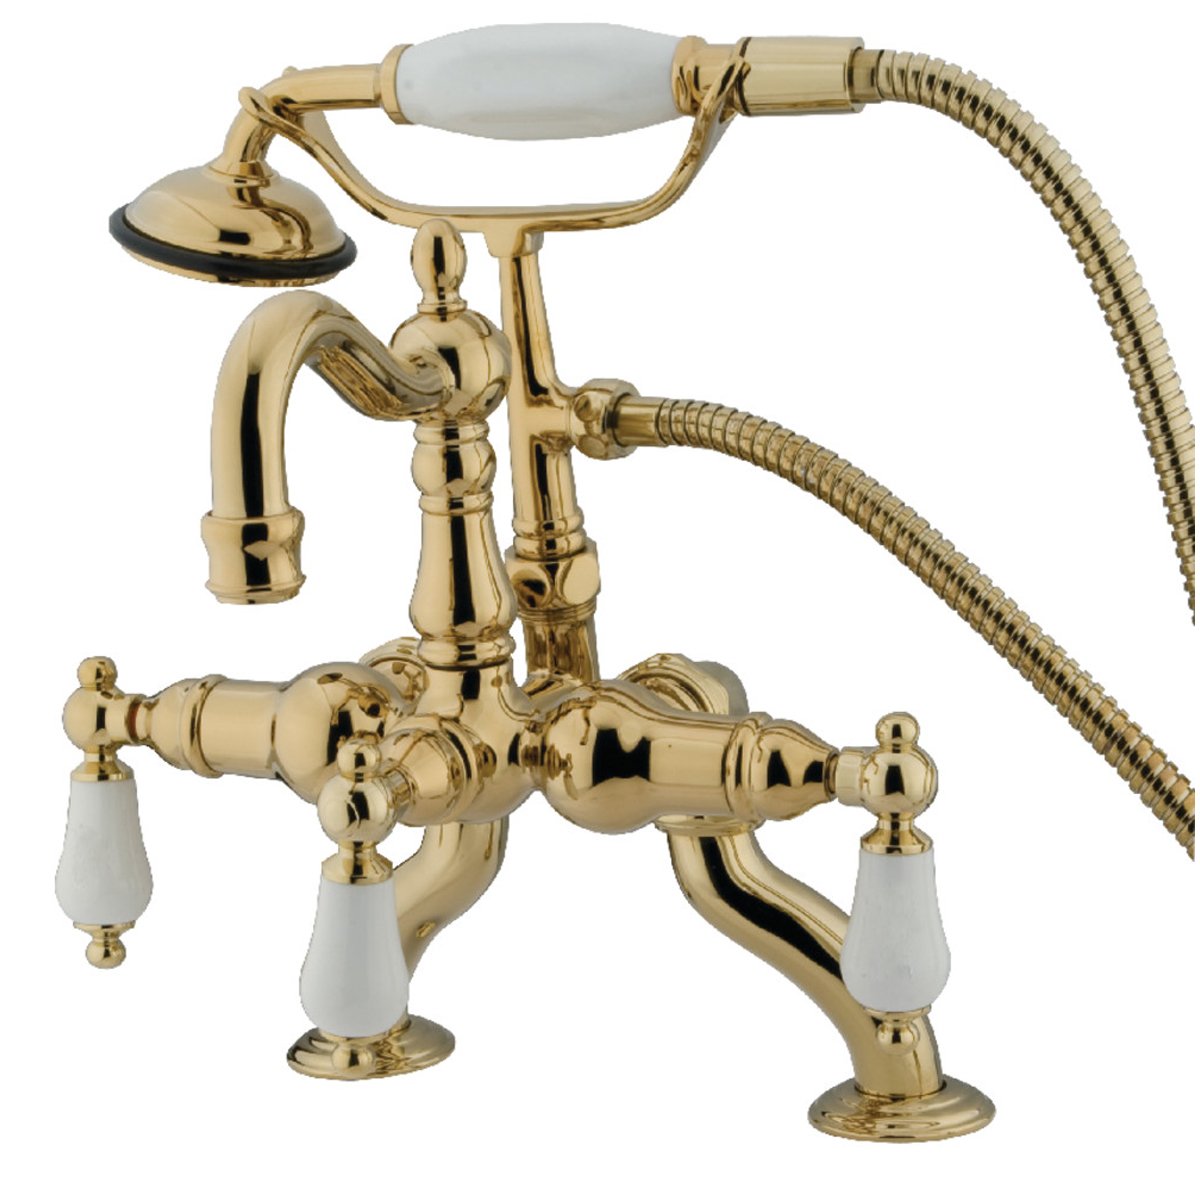 Kingston Brass CC2011TX-P Vintage Clawfoot  11" x 6" x 4.75" Tub Faucet with Hand Shower